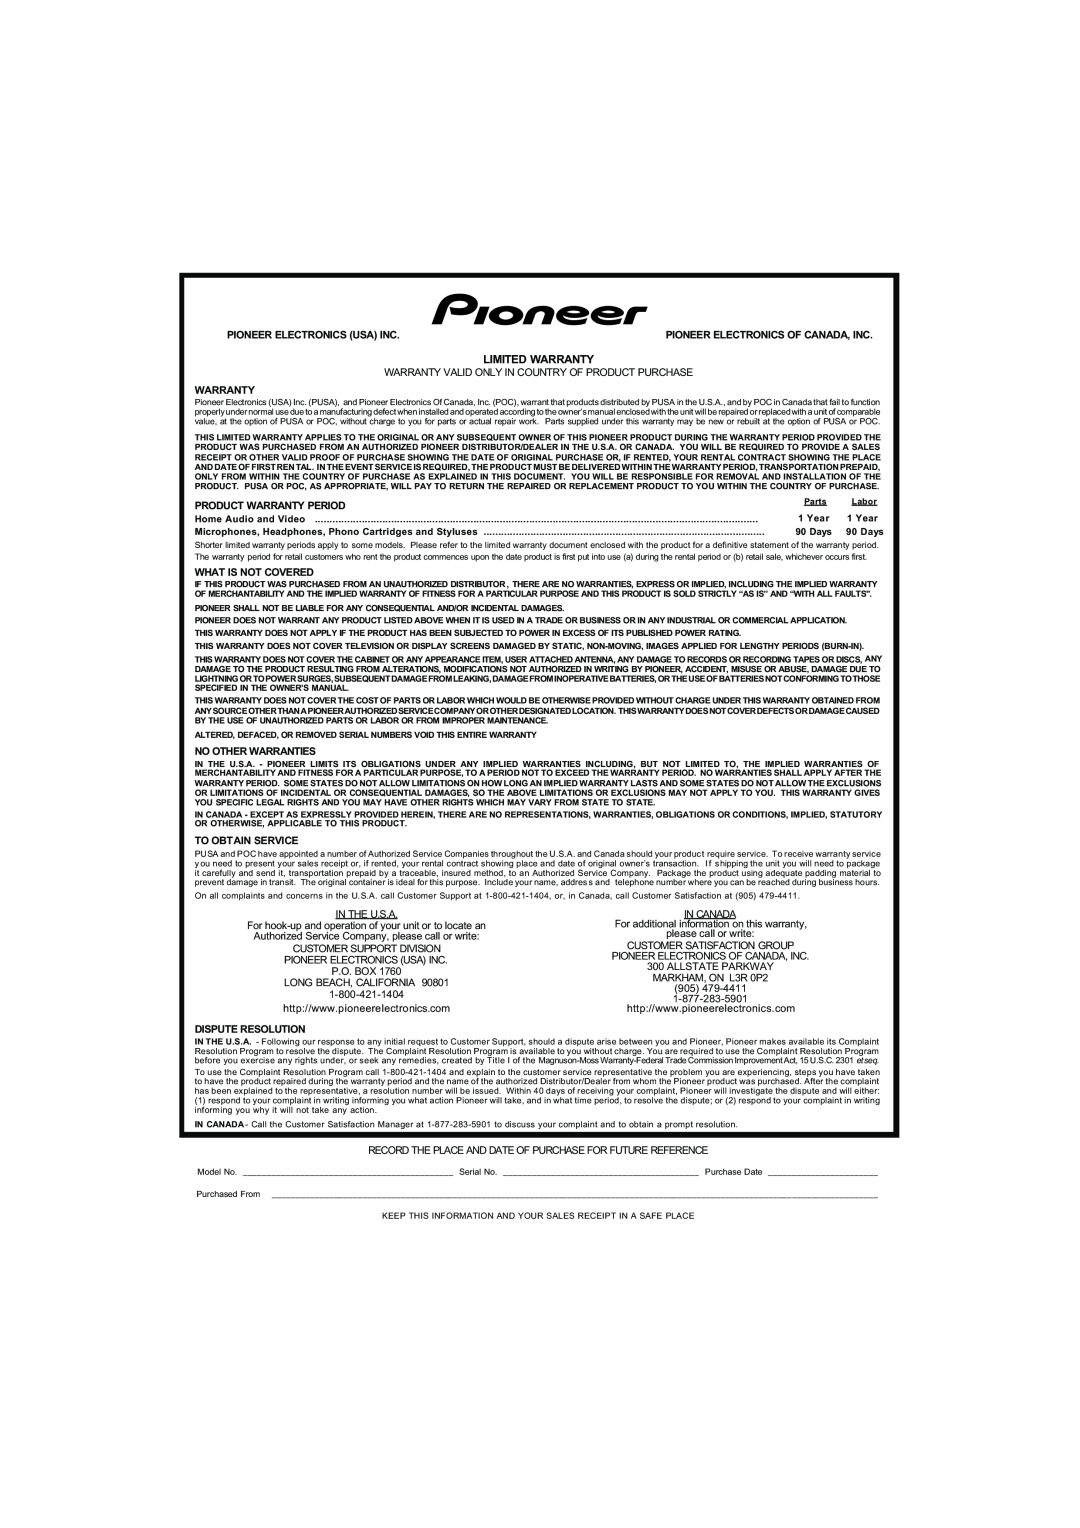 Pioneer VSX-516 Pioneer Electronics Usa Inc, Limited Warranty, Product Warranty Period, What Is Not Covered 